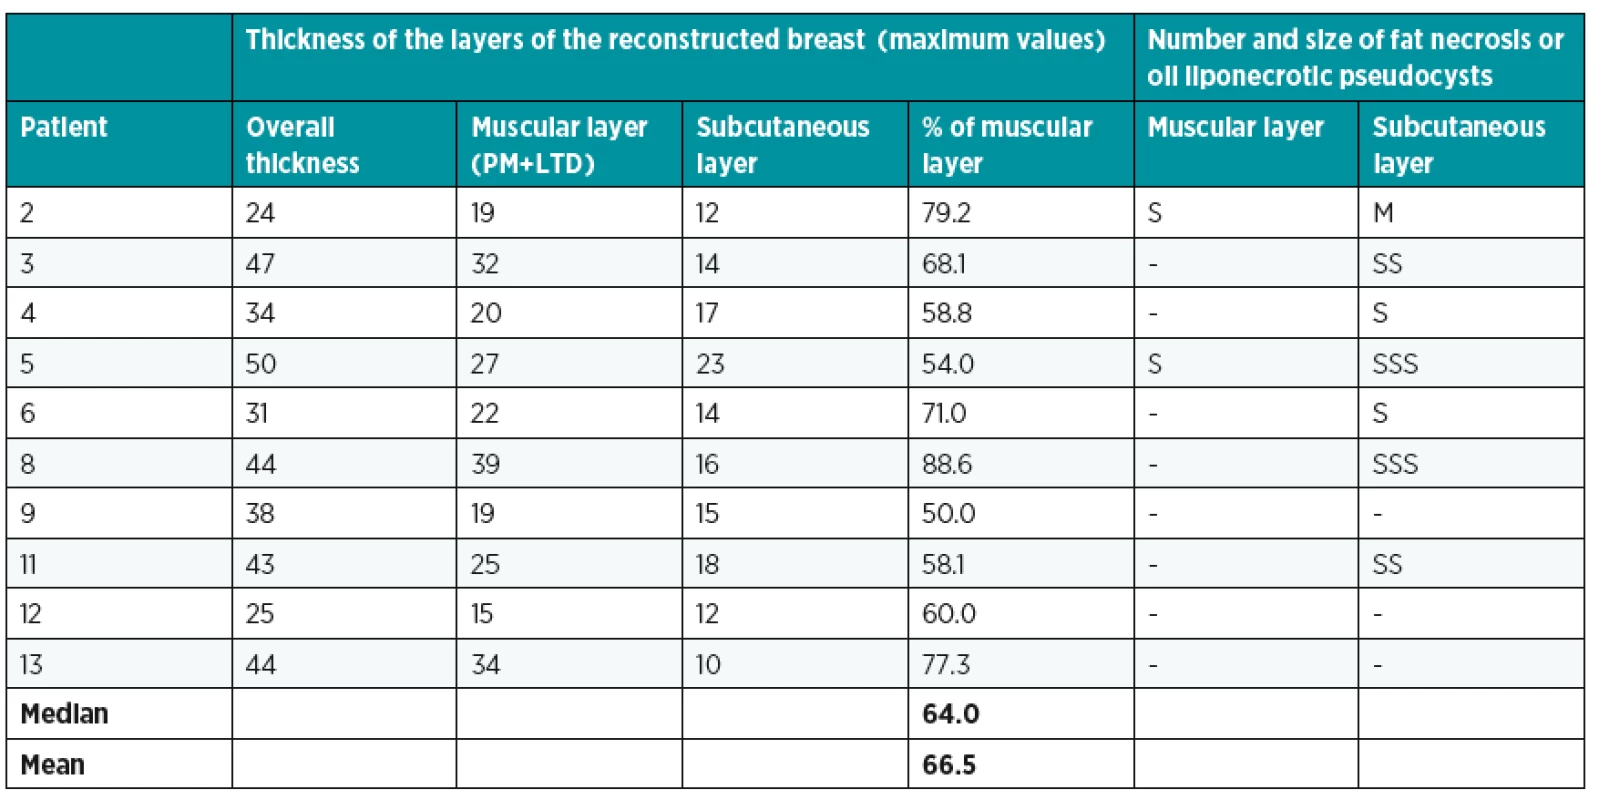 Evaluation of the postoperative breast ultrasound examination. The size of fat necrosis or oil liponecrotic pseudocysts is expressed by different letters: S – small (up to 10 mm in diameter), M – medium (10 to 20 mm in diameter) and L – large (more than 20 mm in diameter). The number of these fat necroses or oil liponecrotic pseudocysts is expressed by the number of these letters: one letter = single, two letters = sporadic (2–10), three letters = frequent (more than 10) and finally hyphen = none